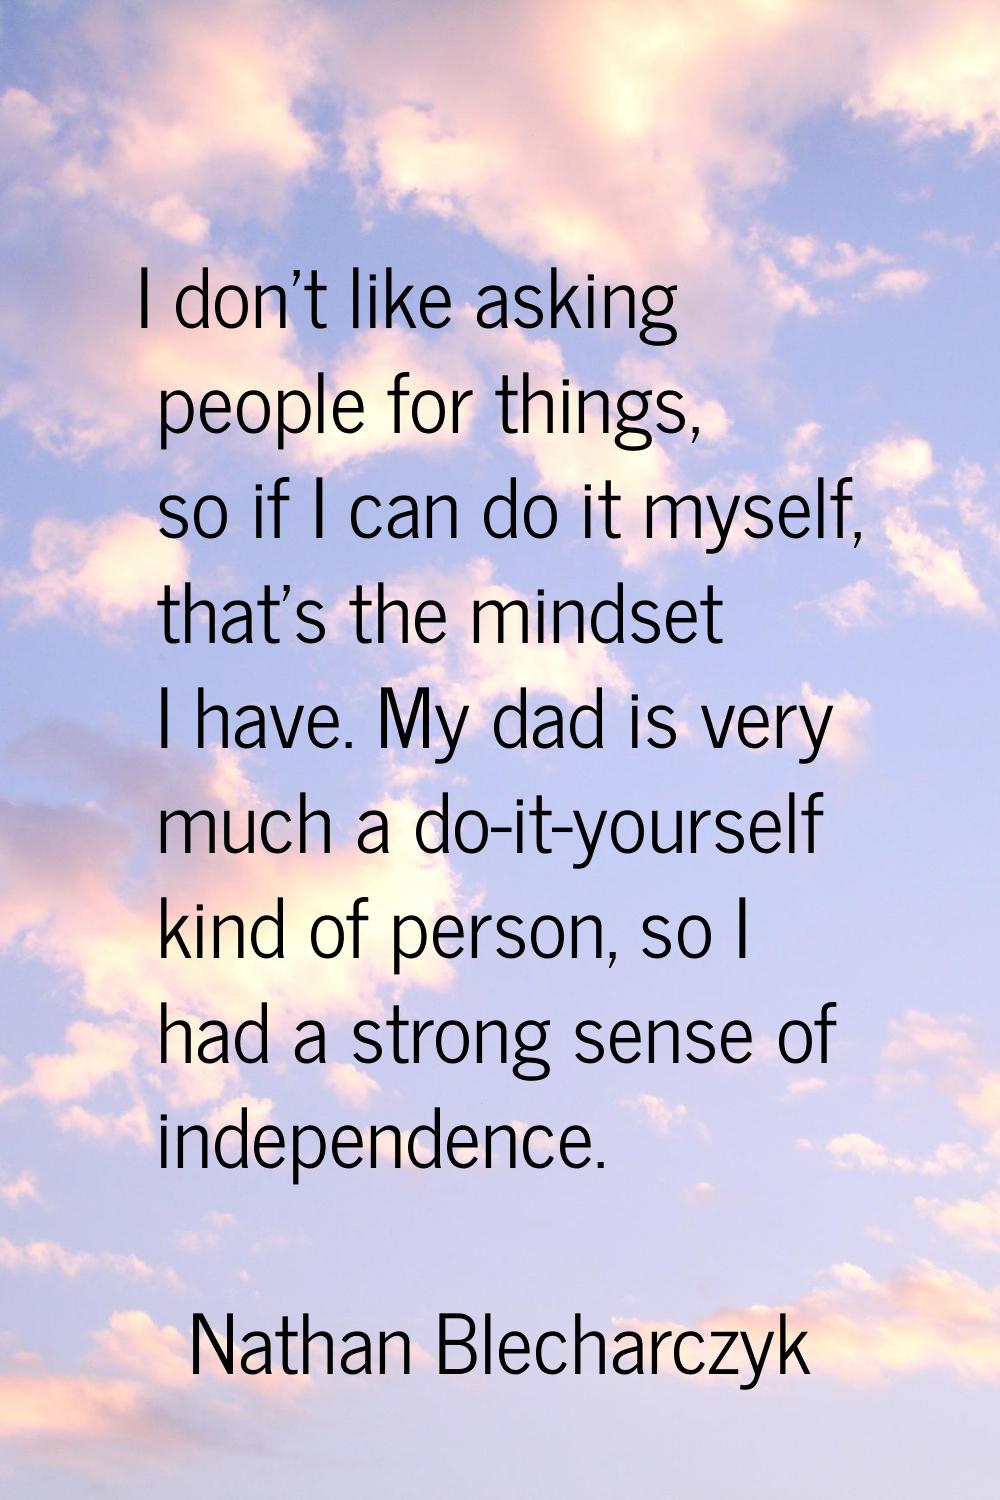 I don't like asking people for things, so if I can do it myself, that's the mindset I have. My dad 